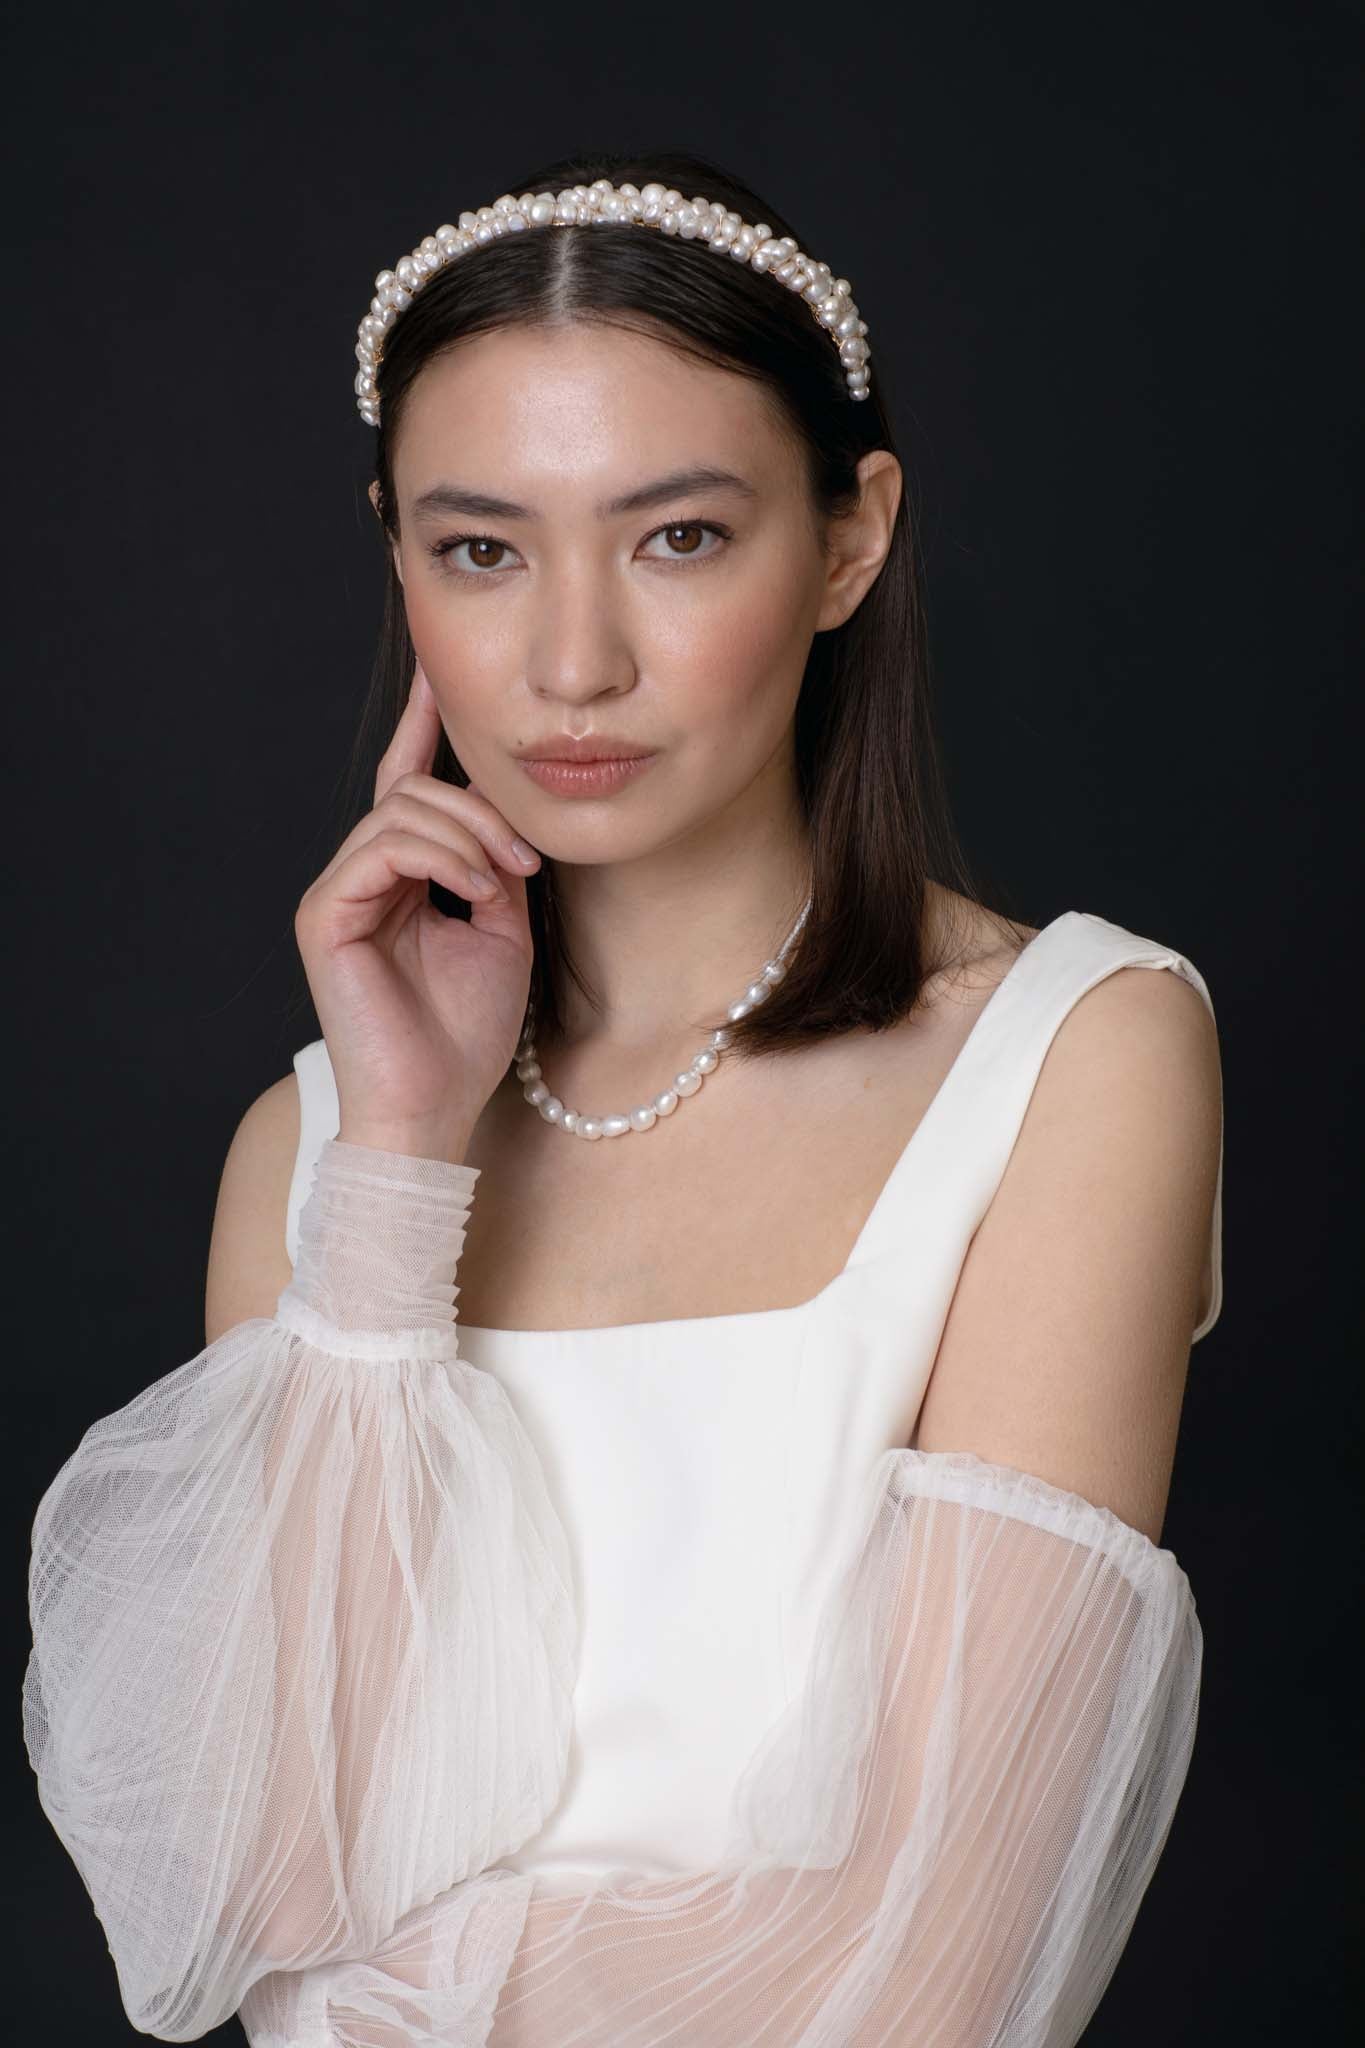 Pearls never fail to create an air of elegant femininity. This headband is the perfect contemporary piece for any bridal moment.